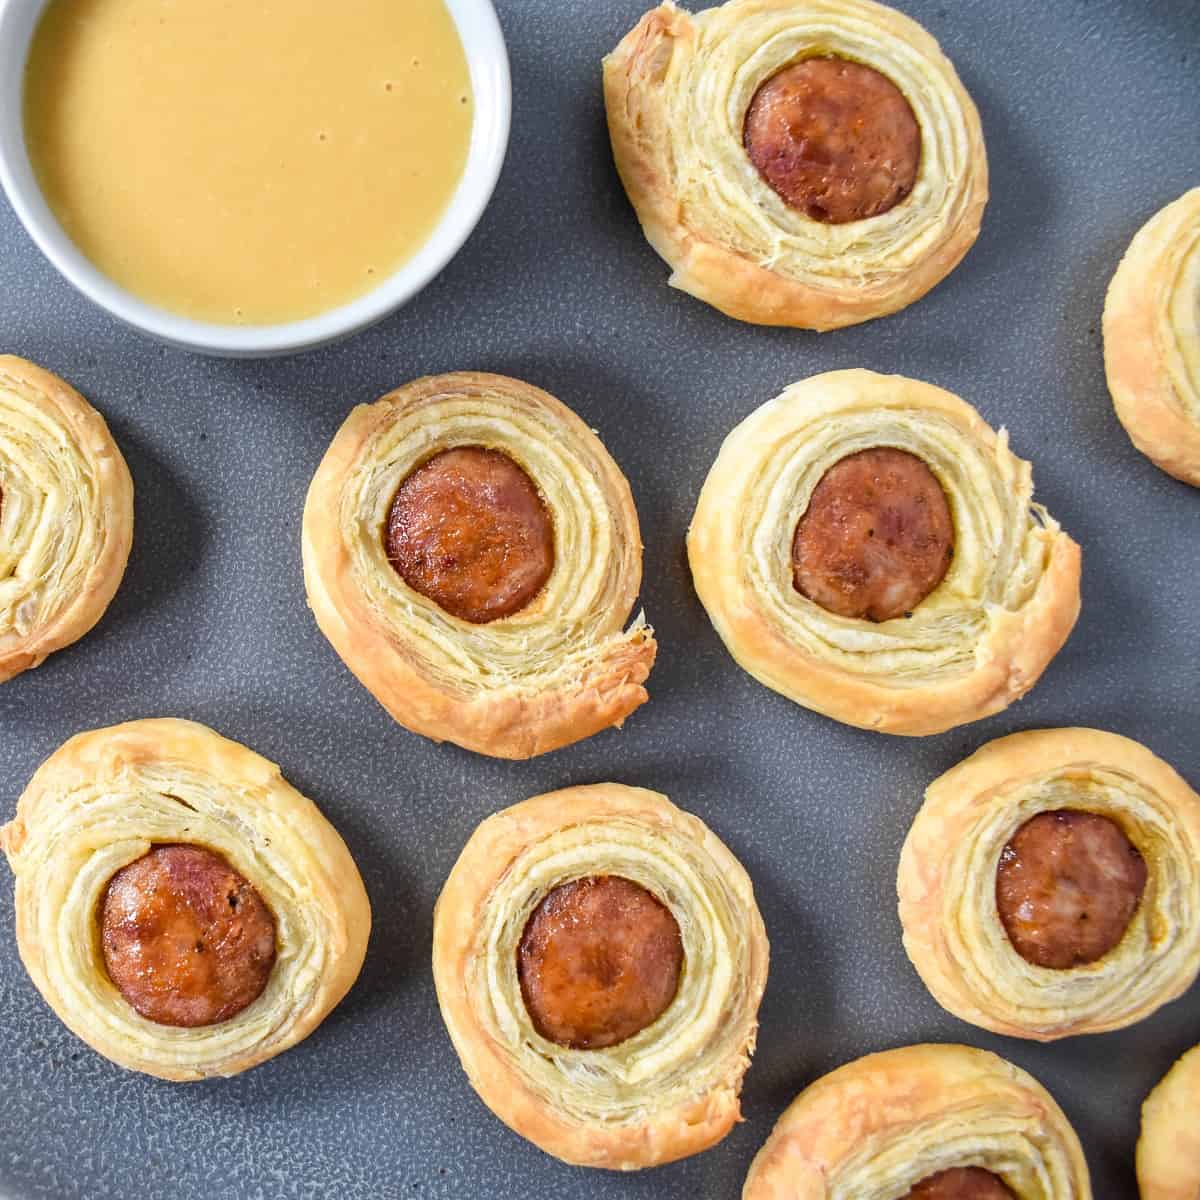 A close up image of the andouille sausage pastries arranged on a large gray platter with a small bowl of the dijon honey sauce and a small spoon to the side.